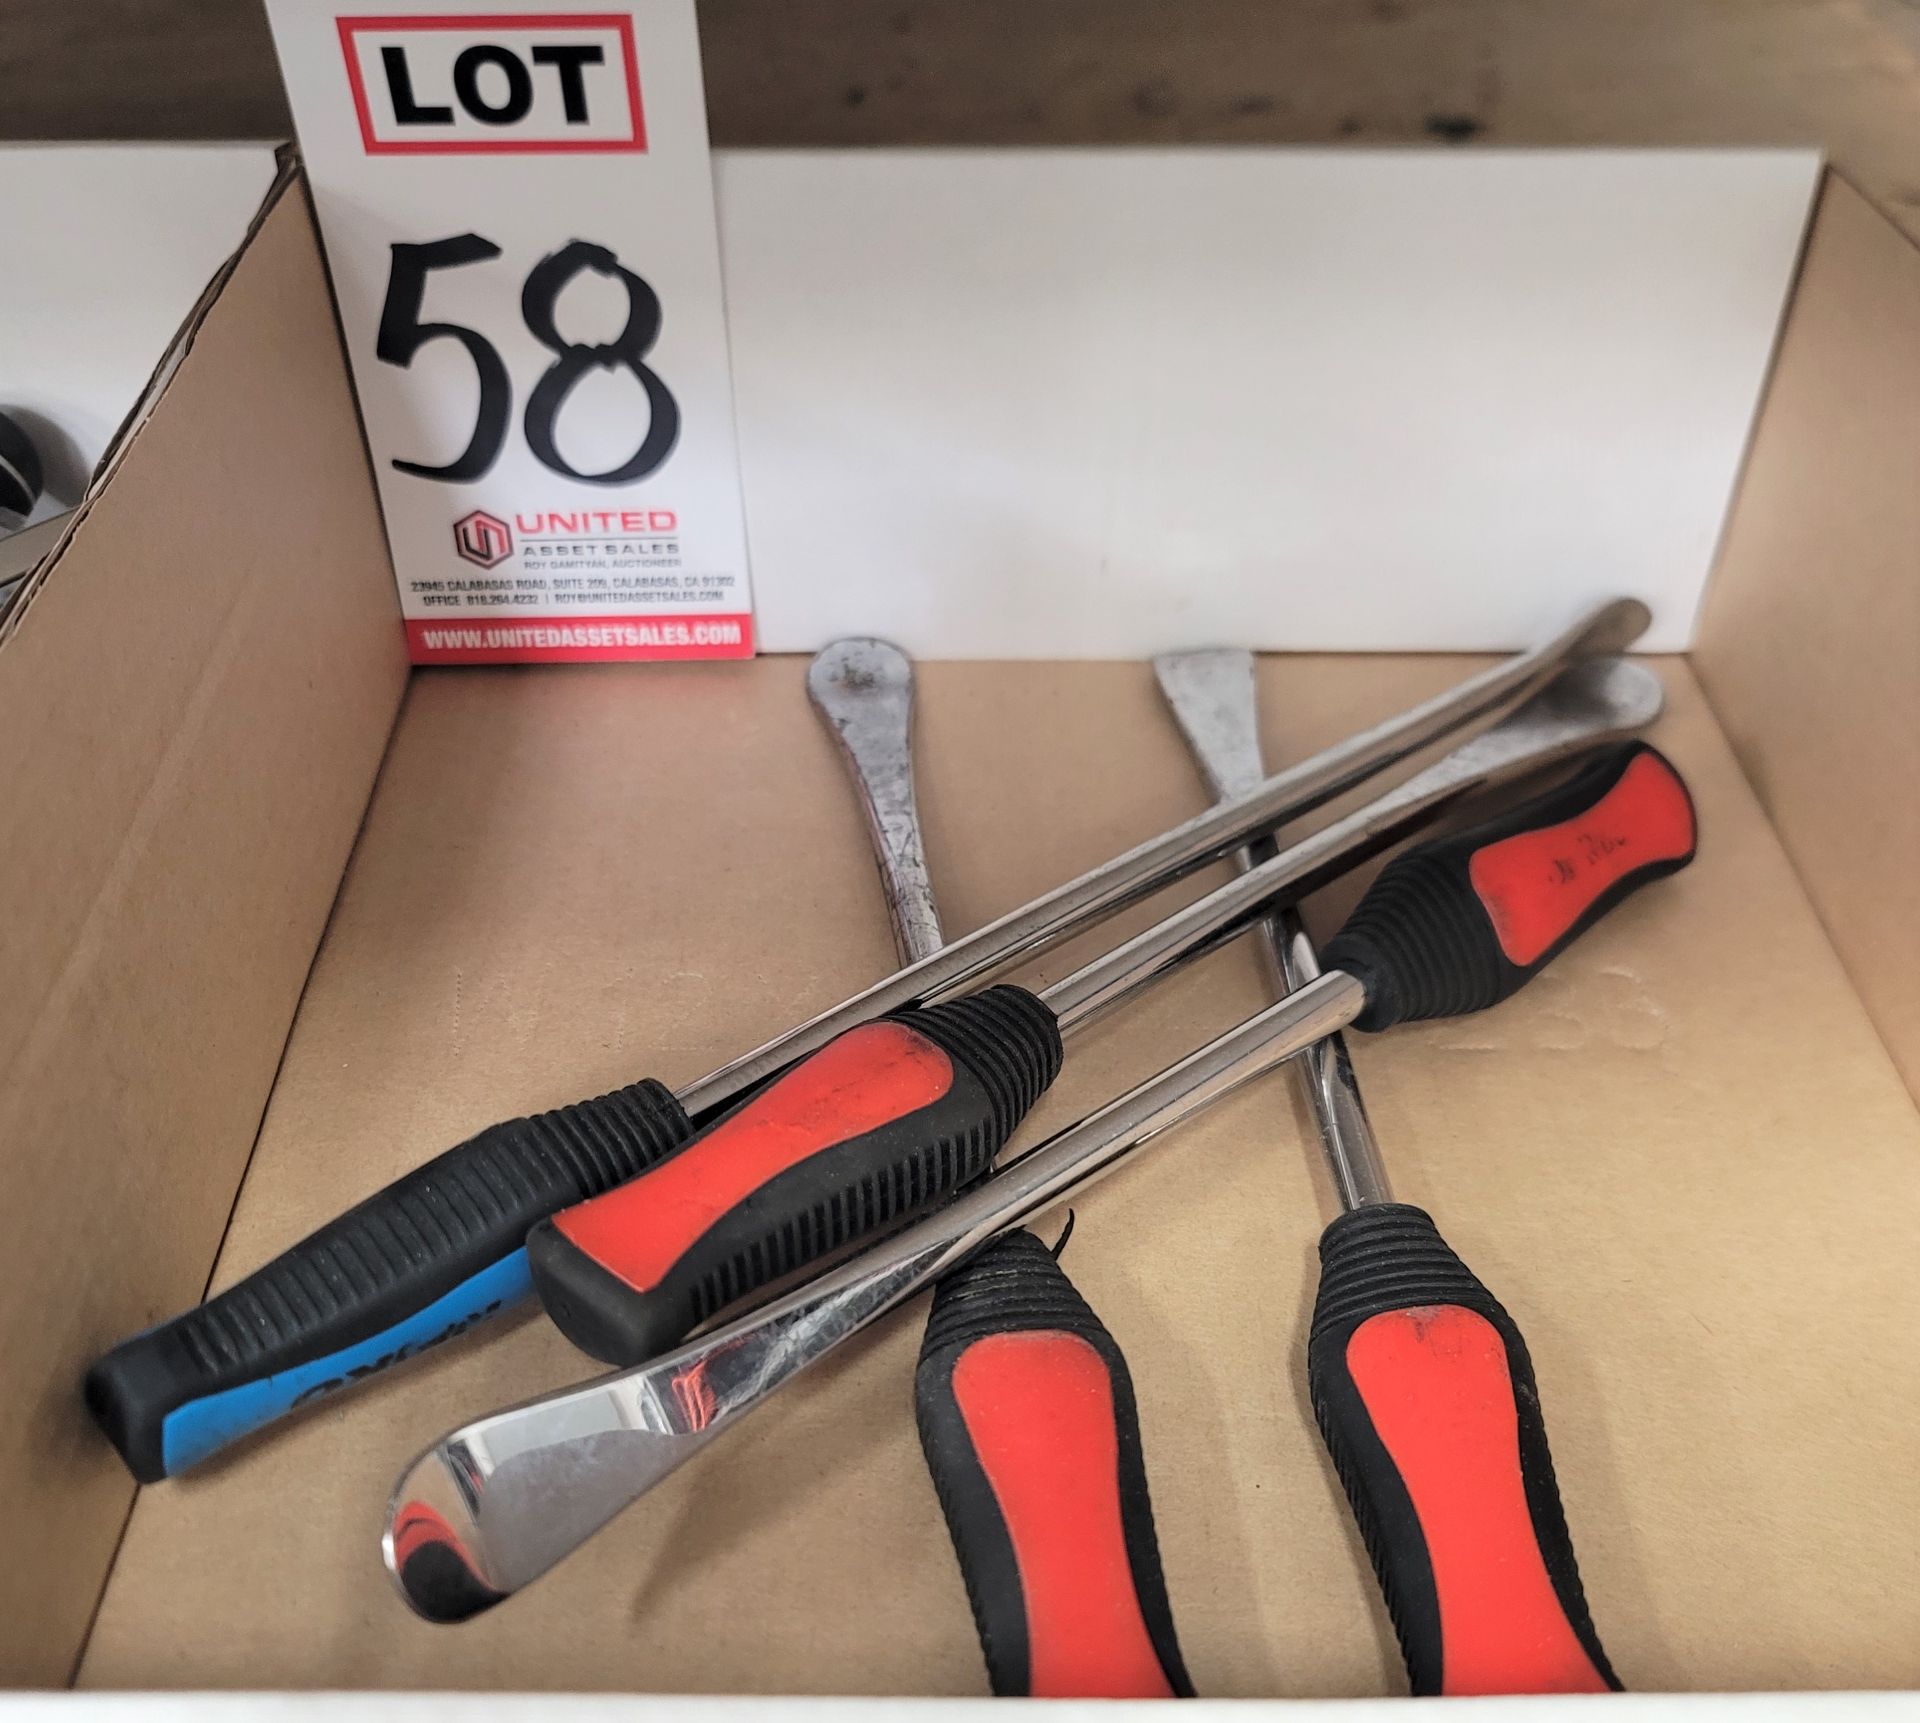 LOT - TIRE SPOONS